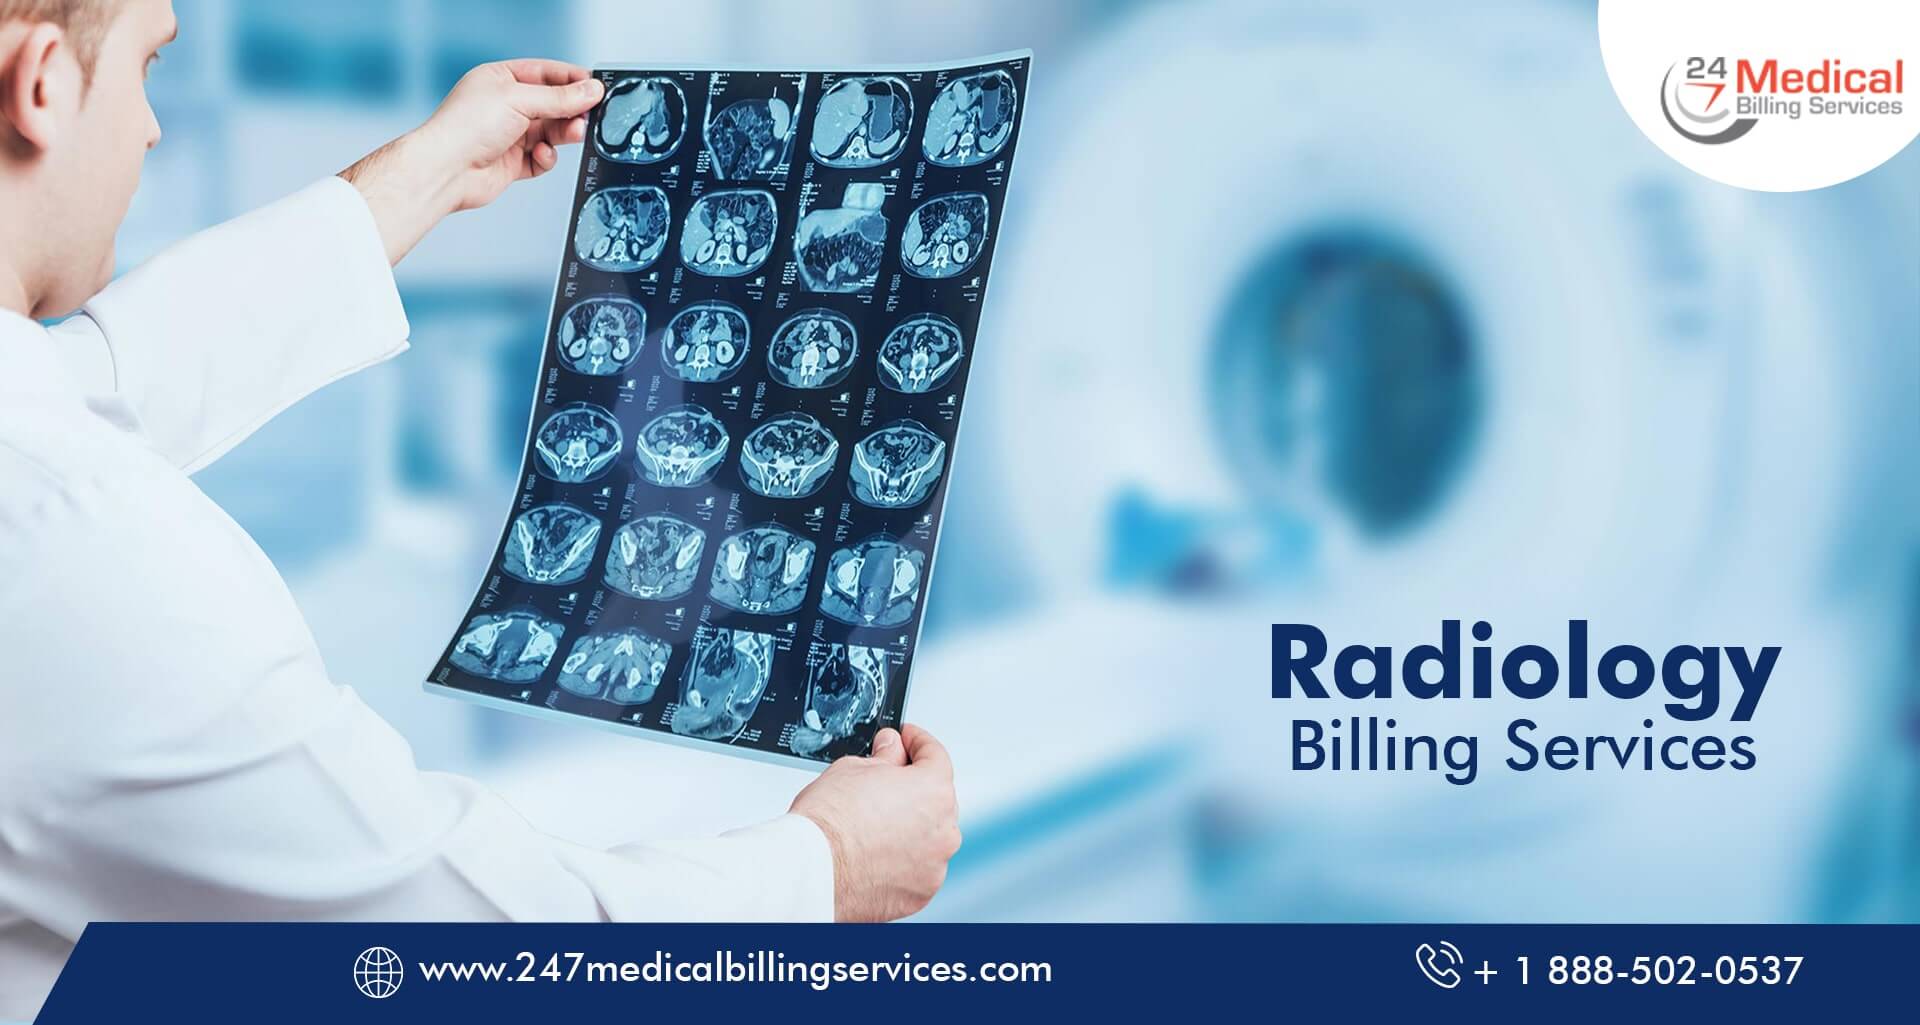  Radiology Billing Services in Alabama, Ohio (OH)